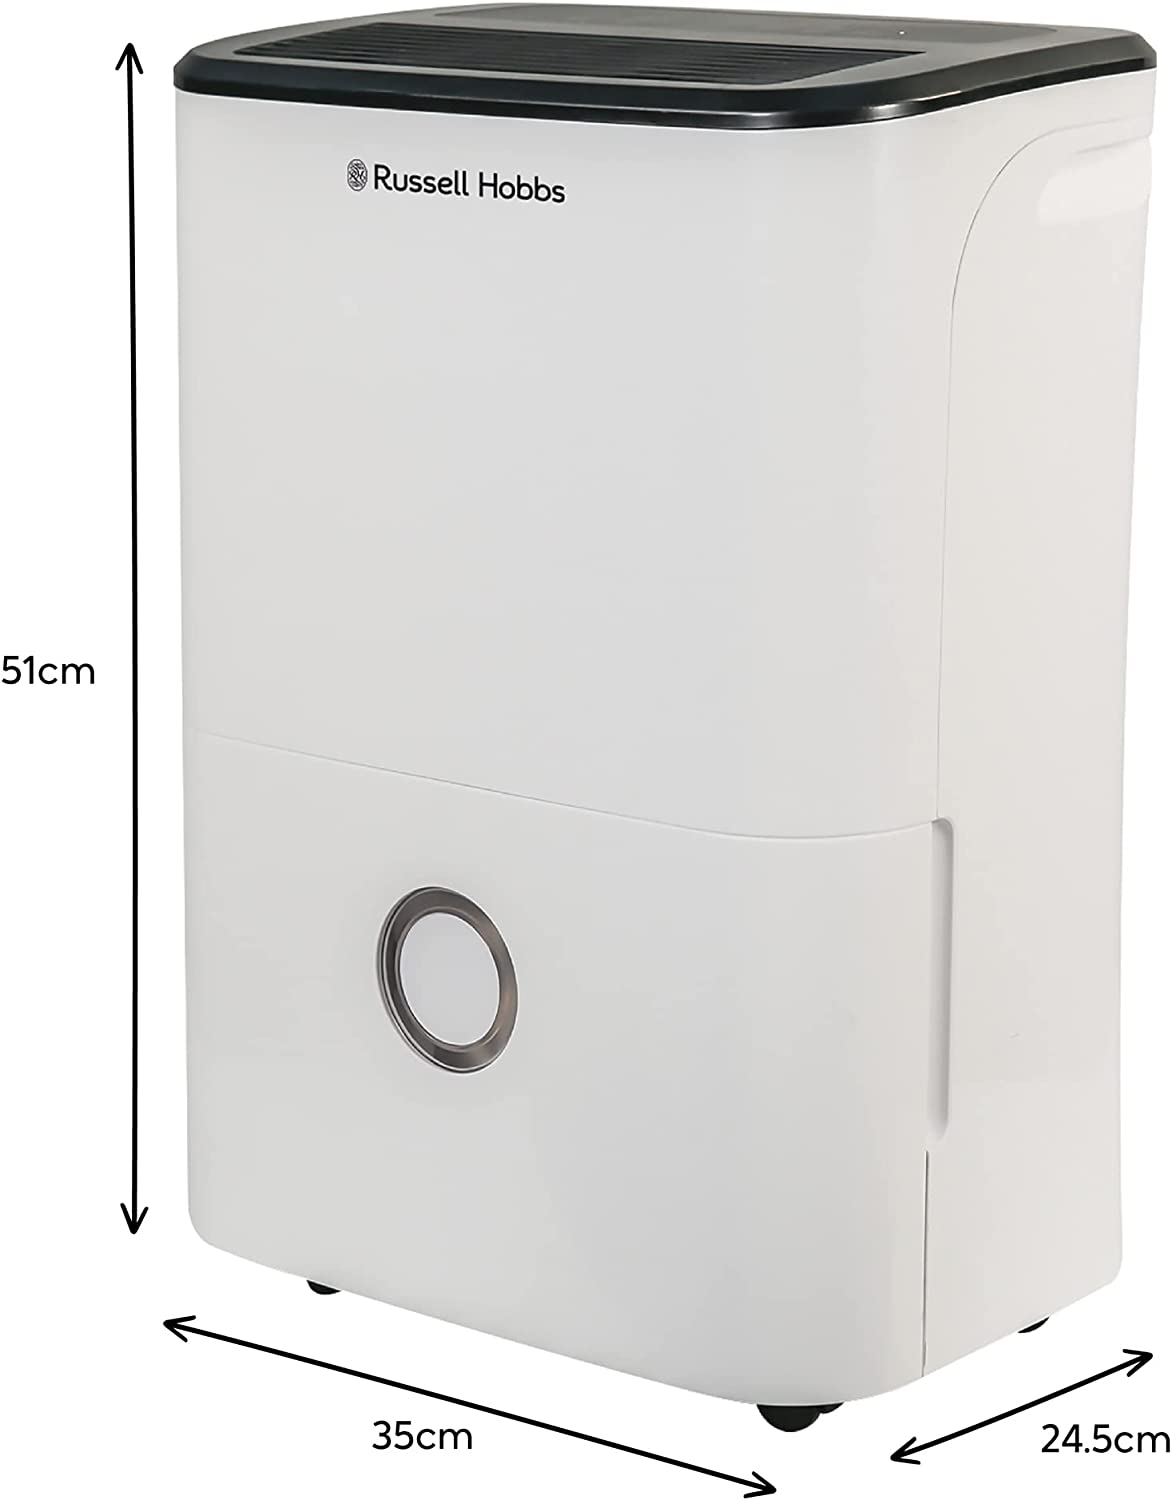 Russell Hobbs RHDH2002 20 litre Day Humidifier